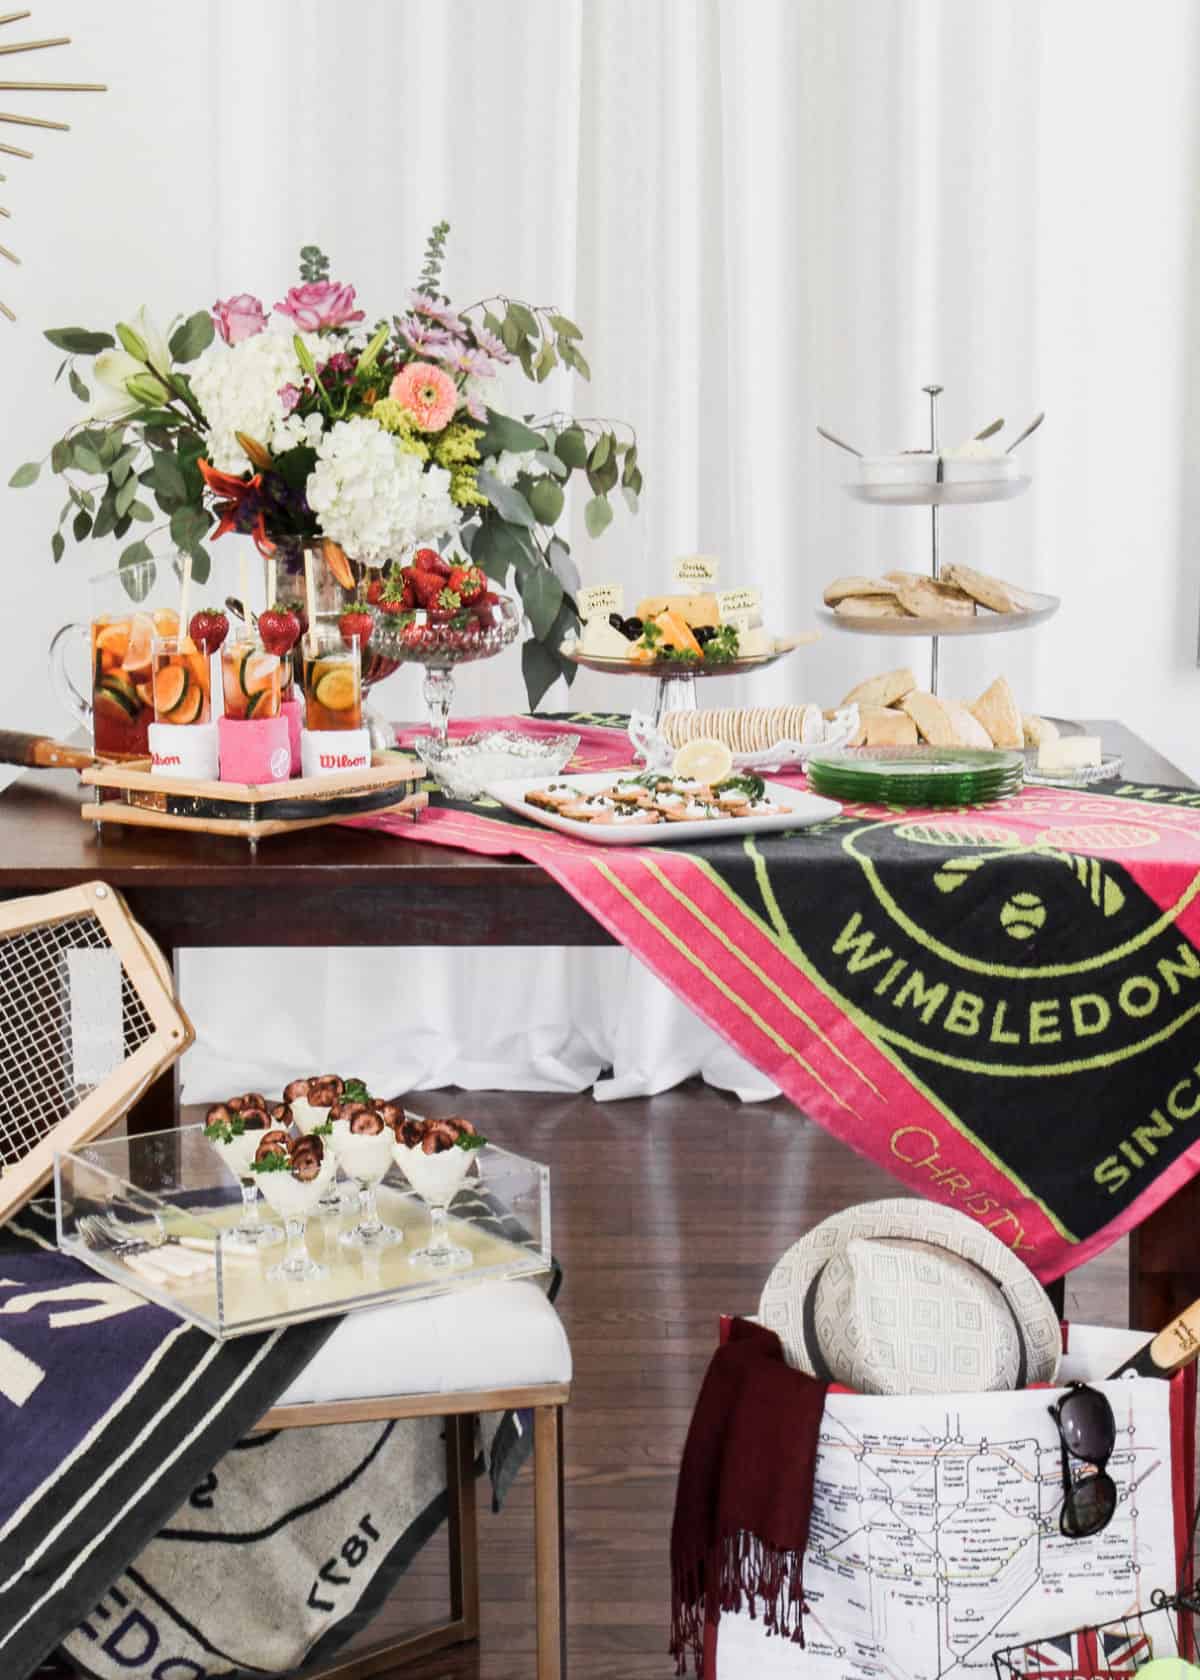 Wimbledon theme party table with tennis decor and brunch food.